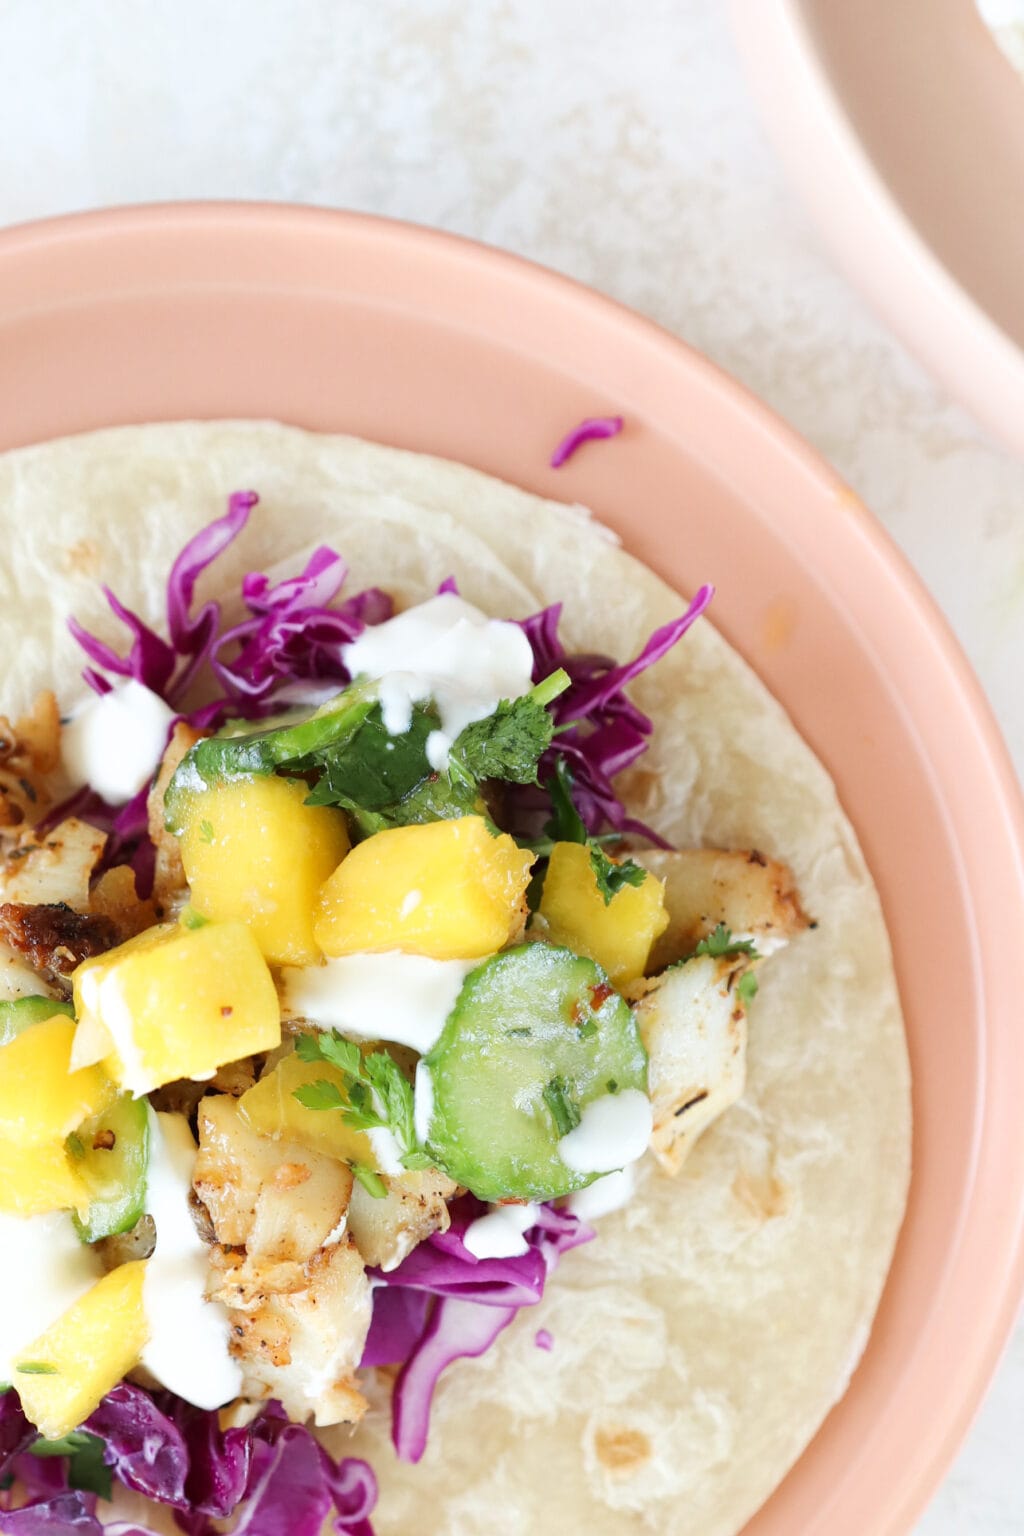 A fish taco with cabbage, cucumber, and mango as filling is on a plate.